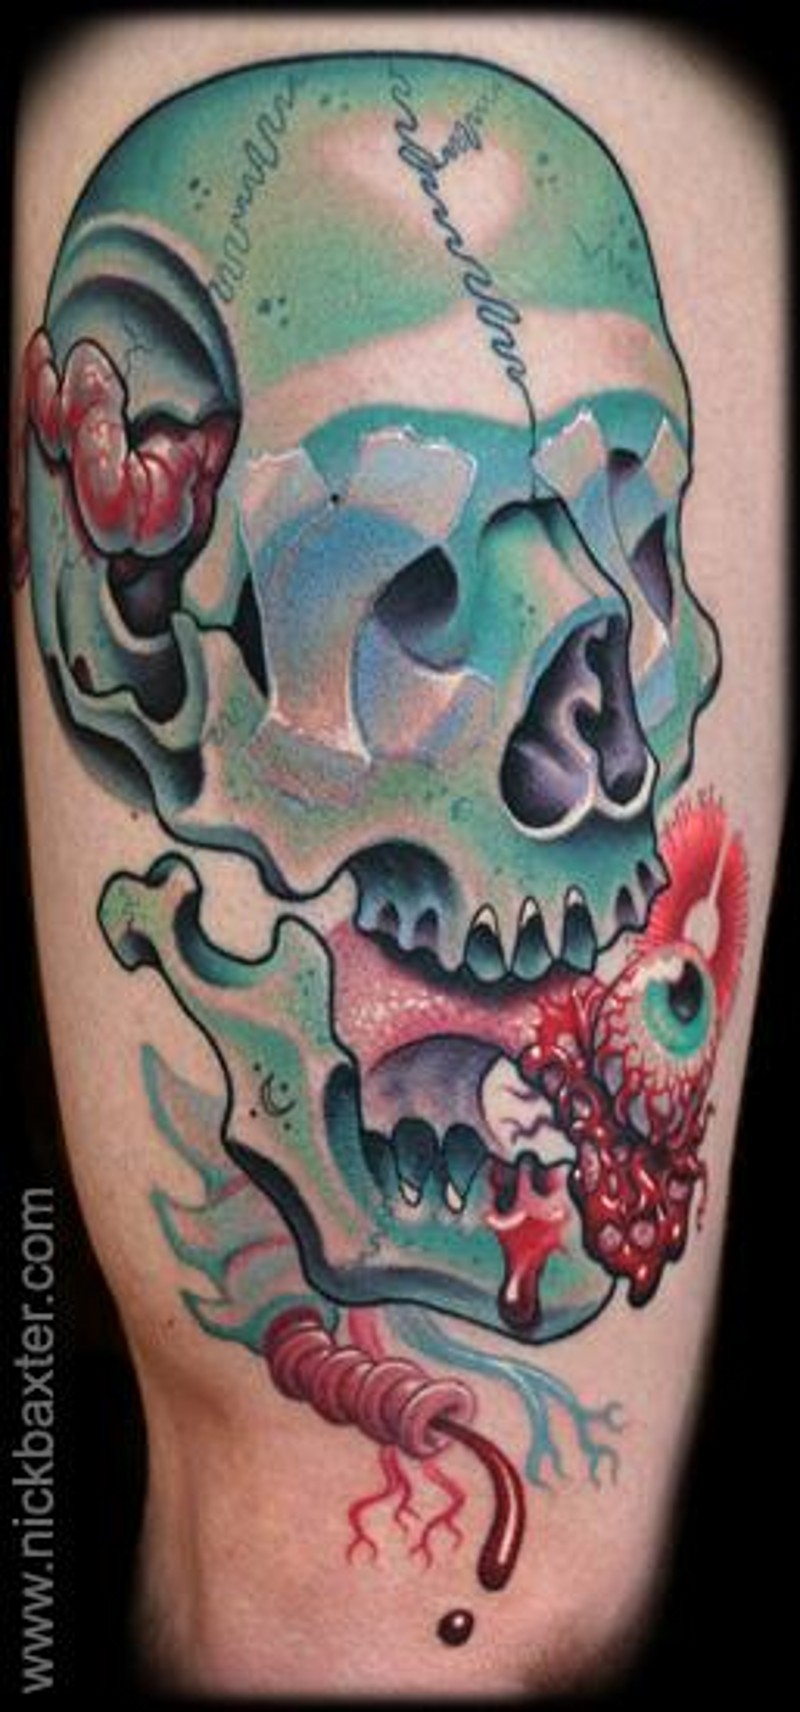 Terrifying colored human skull with bloody eye and brains tattoo